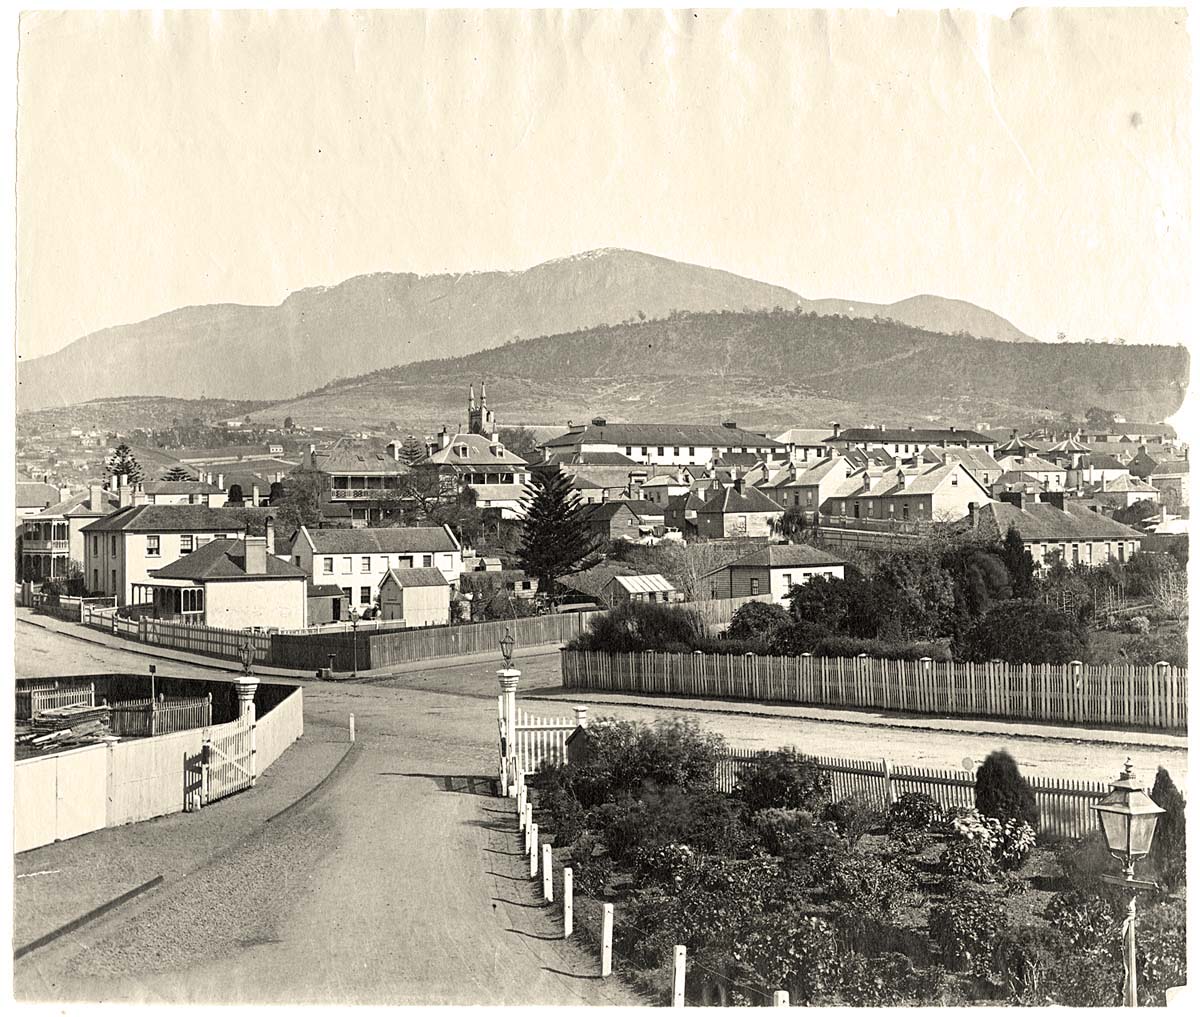 Hobart. Panorama of city from the Railway Station, circa 1881